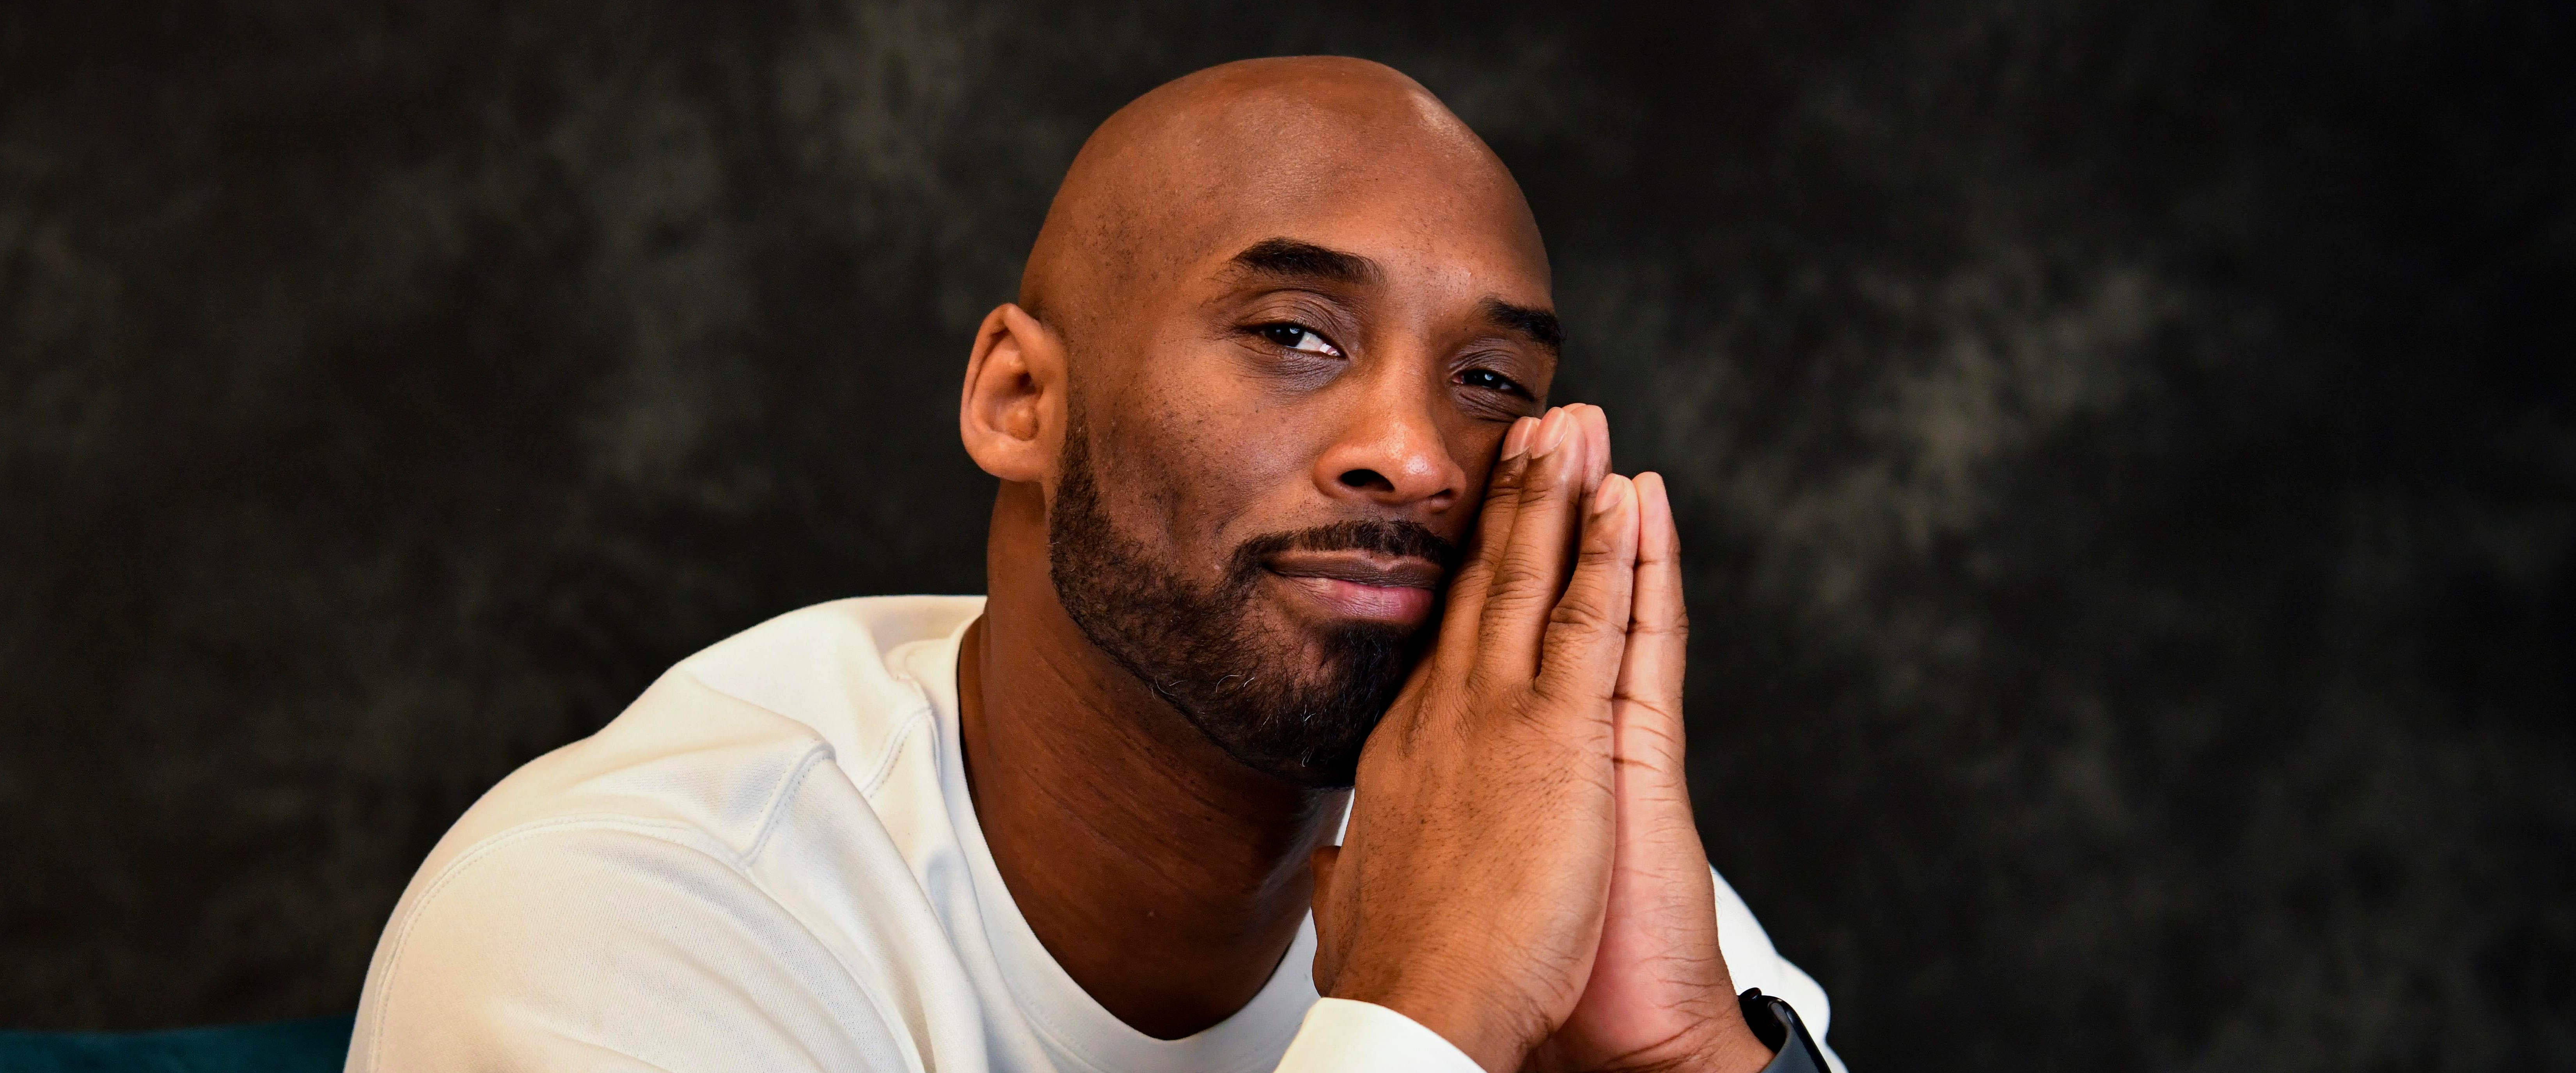 Remembering Kobe Bryant - 3 of the greatest moments in his NBA career